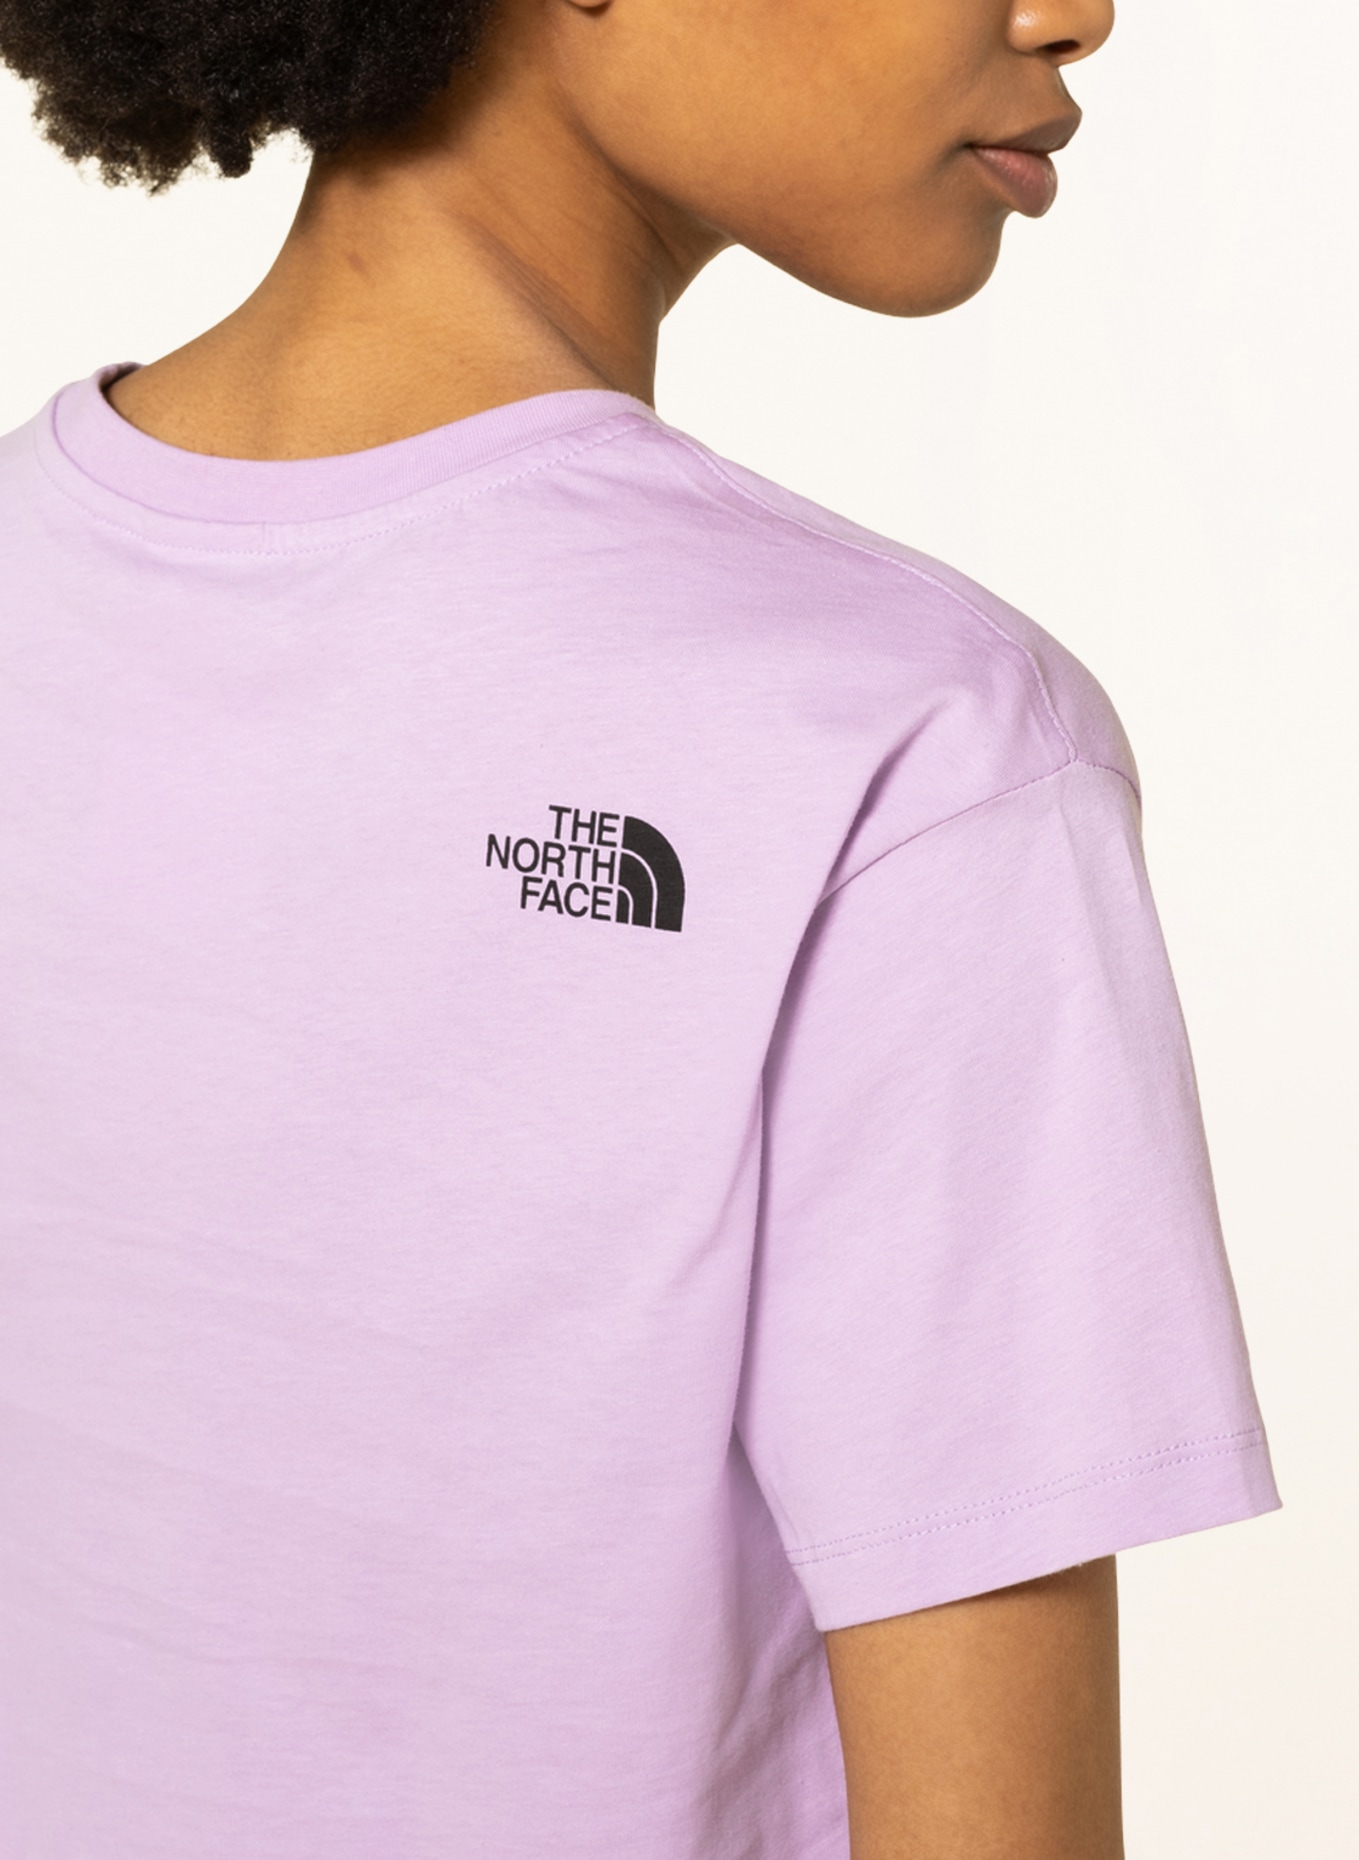 THE NORTH FACE Cropped-Shirt FINE TEE, Farbe: HELLLILA (Bild 4)